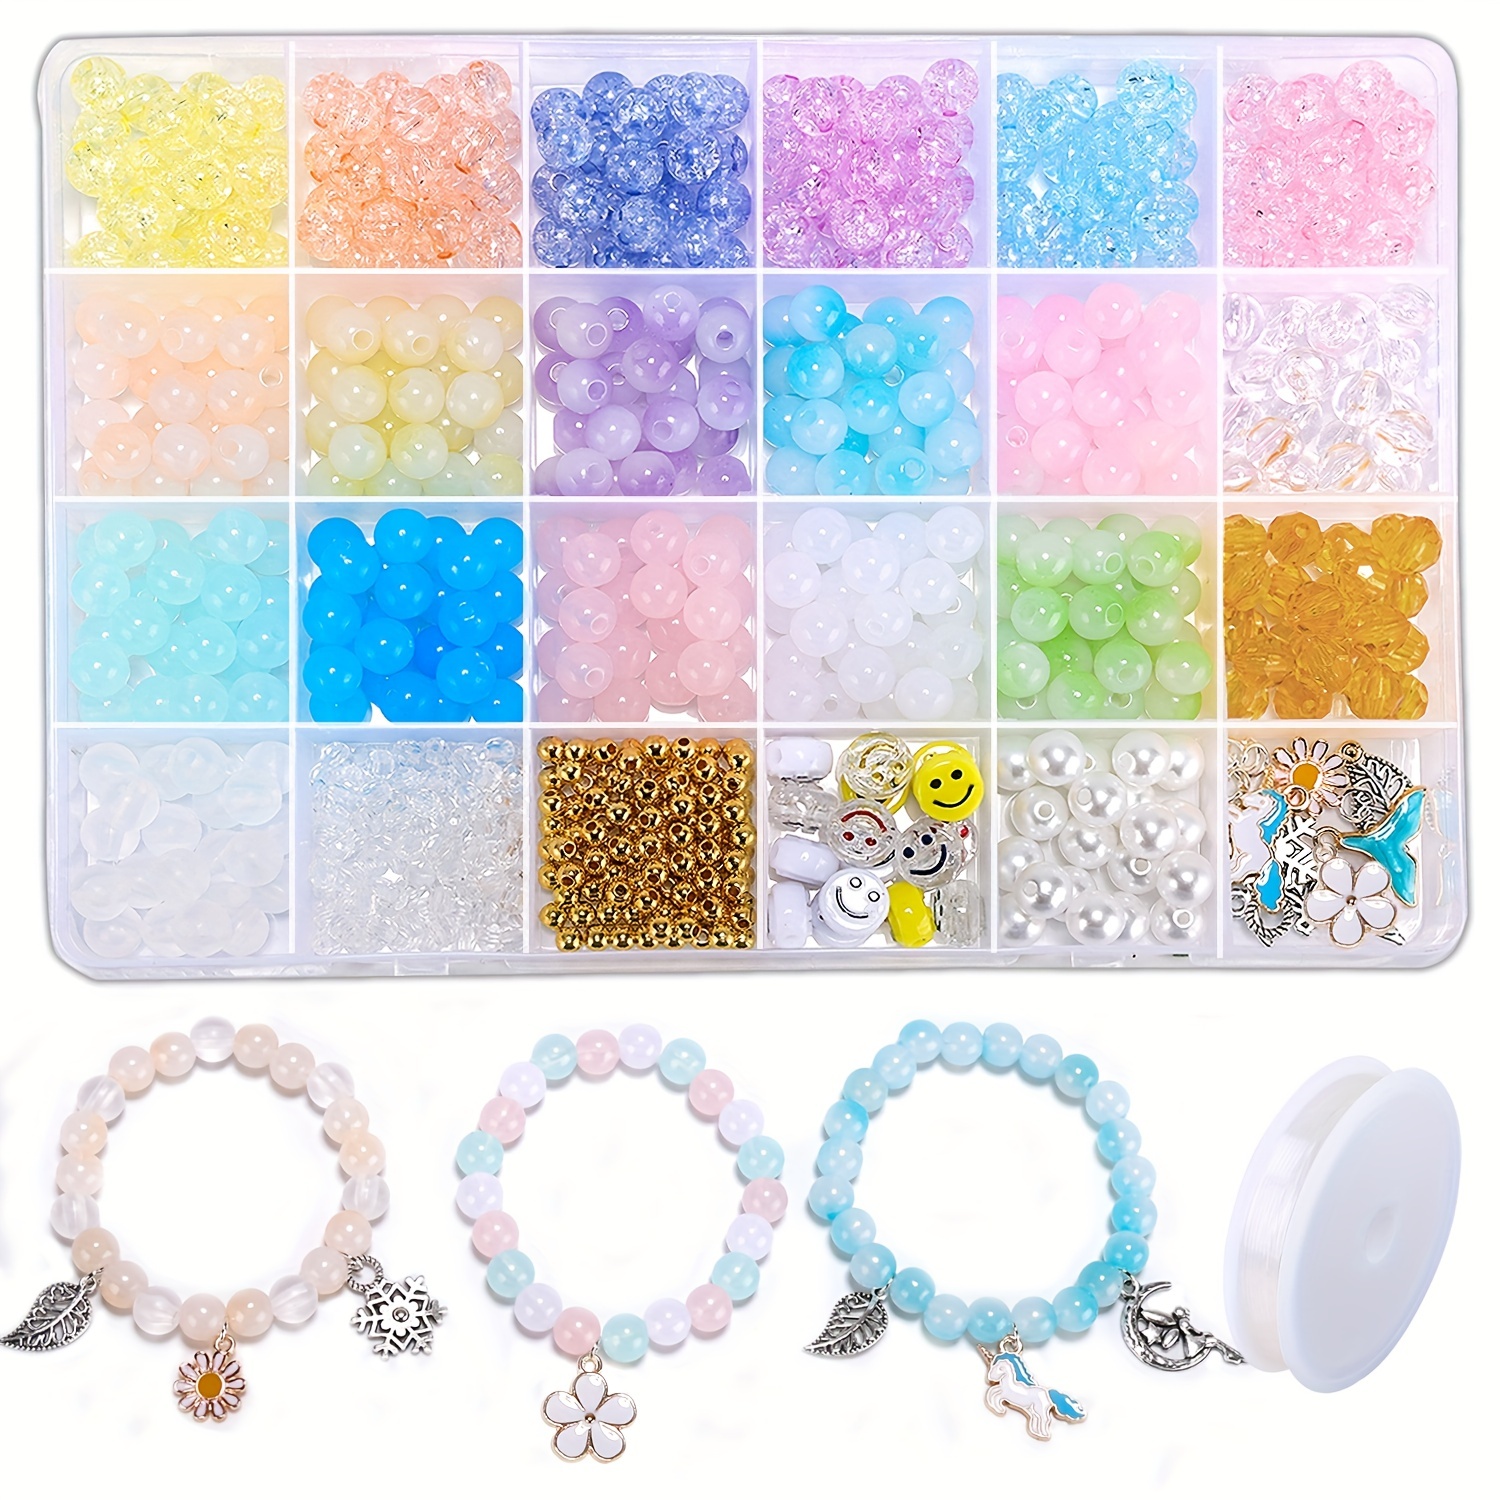 CLEARANCE Beaded Crystal Adjustable Bangle Bracelet Blanks in Assorted  Colors 